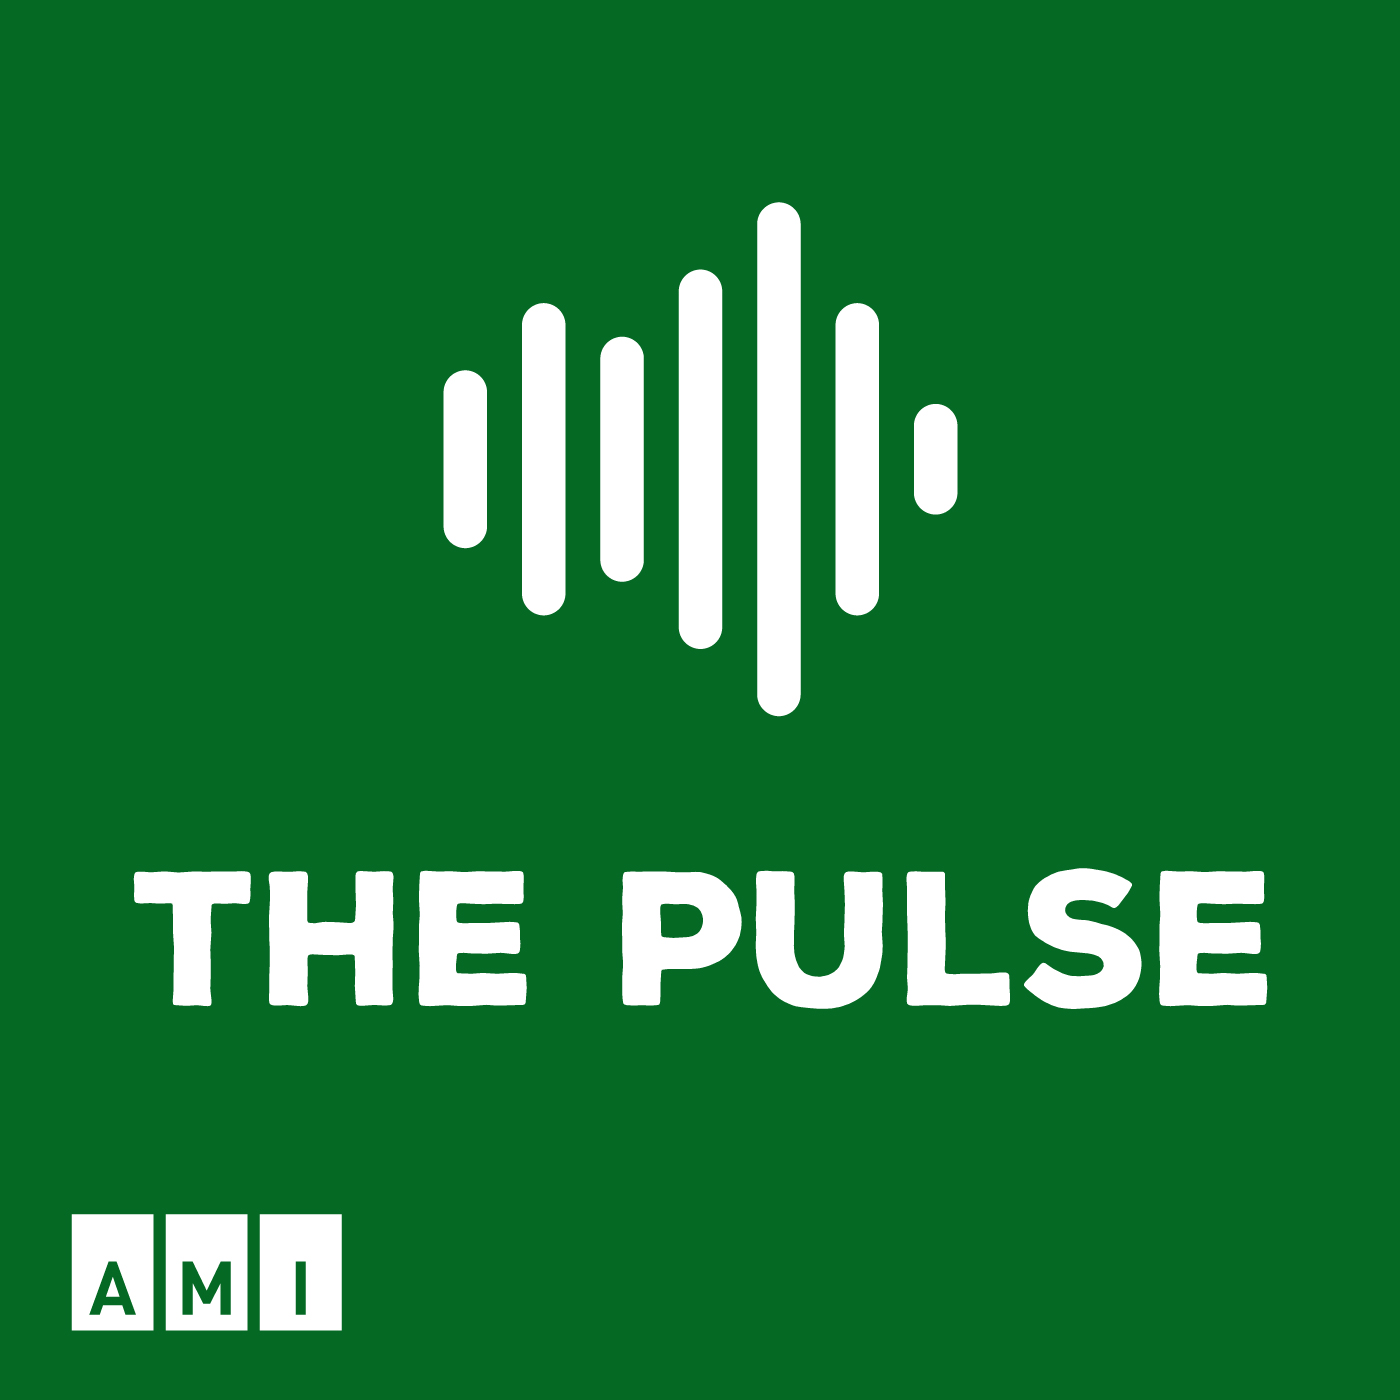 White vertical lines simulating a pulse on a green background above text that says “The Pulse”.